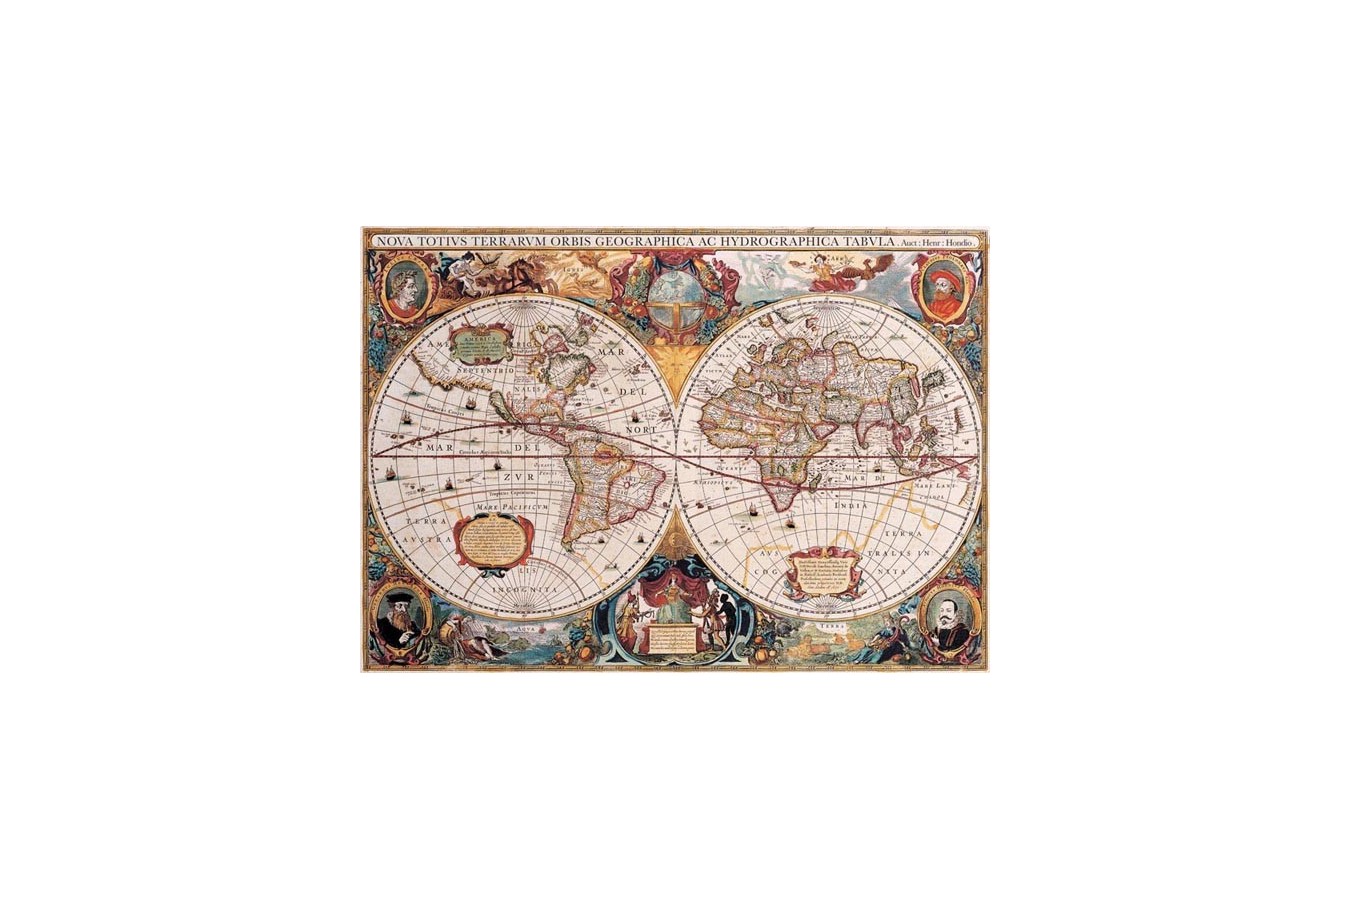 Puzzle Gold Puzzle - Old World Map, 1000 piese (Gold-Puzzle-60096)